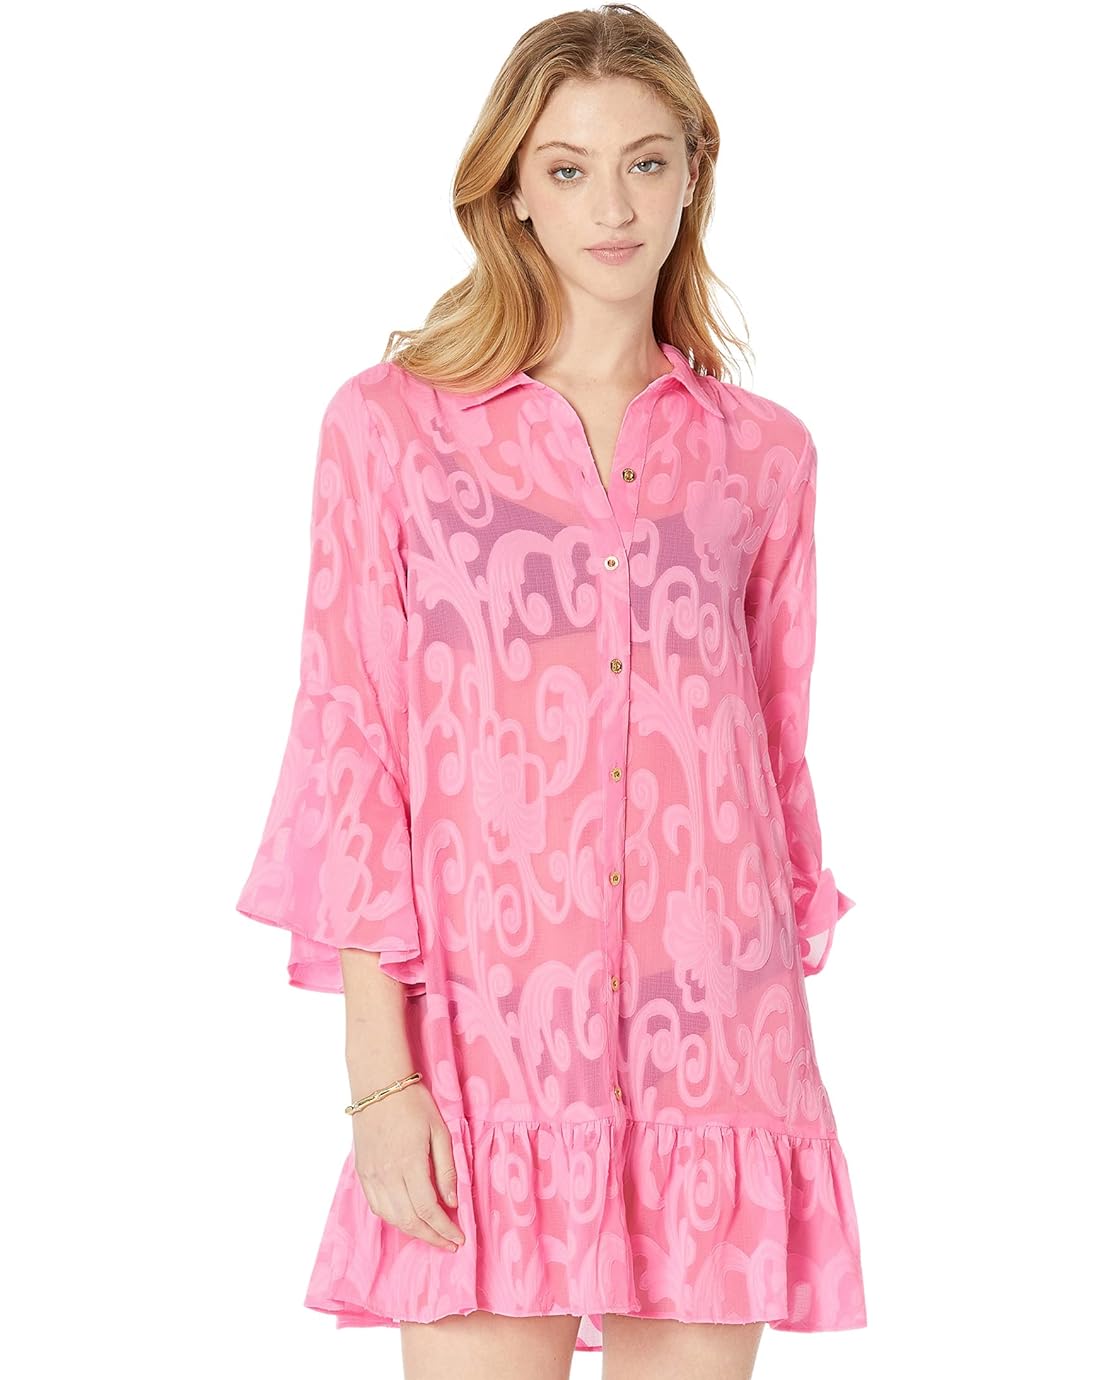 Lilly Pulitzer Linley Cover-Up